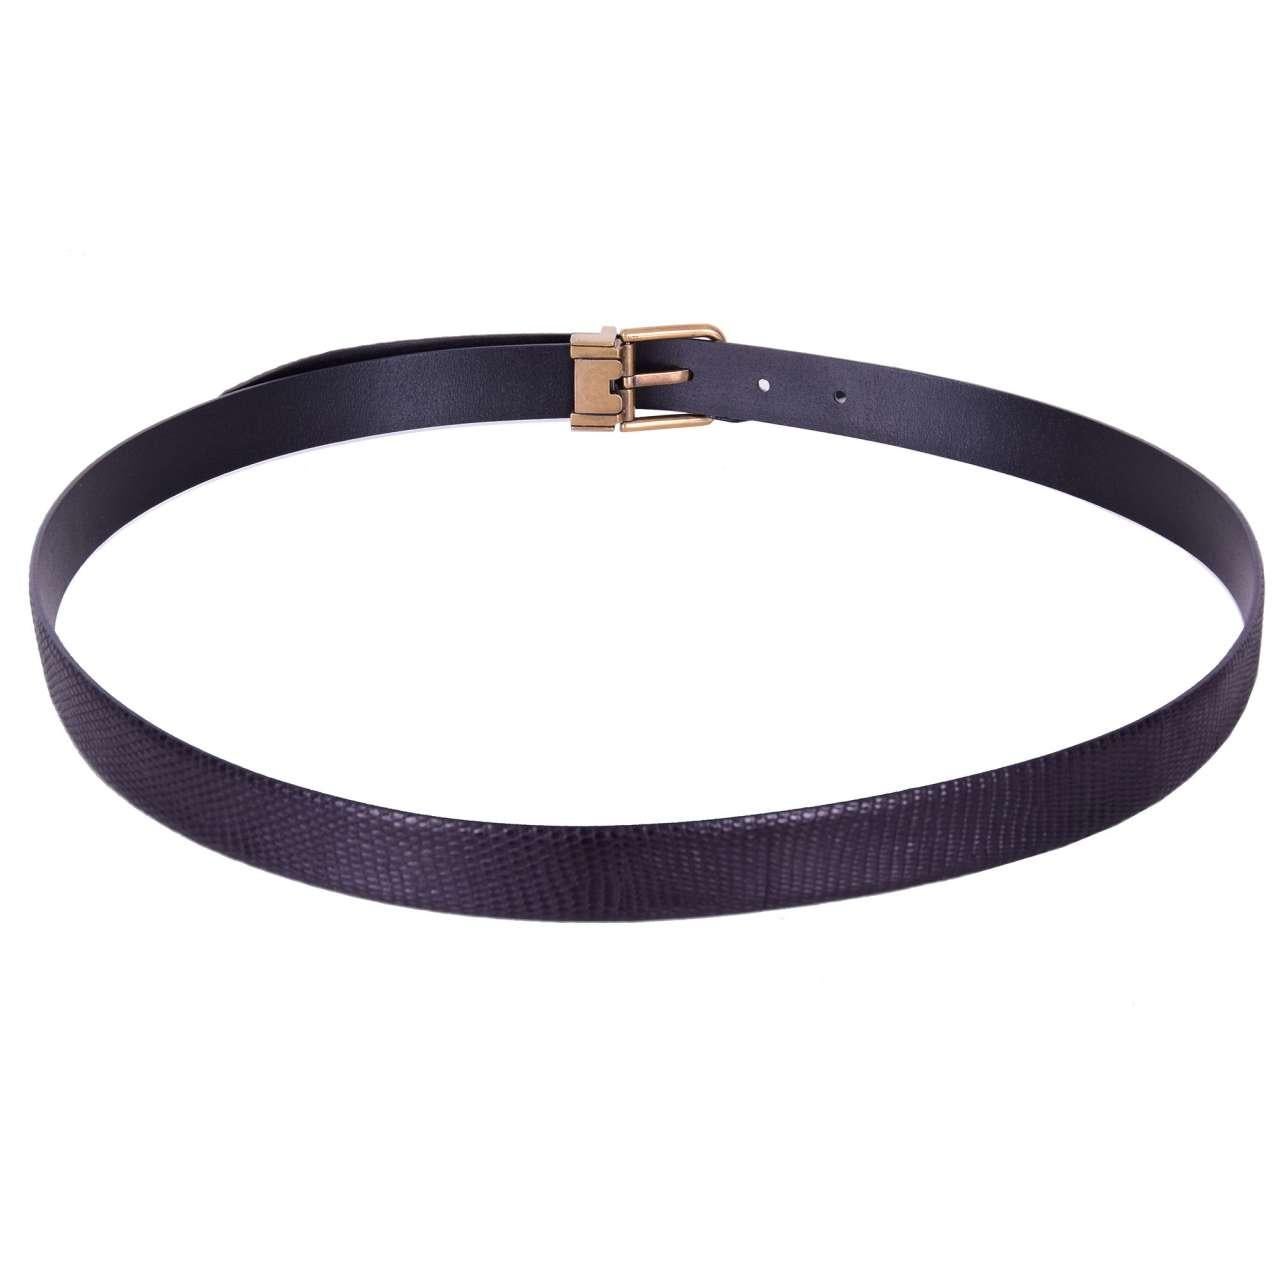 - Lizard belt with removable roller buckle in black by DOLCE & GABBANA Black Label - MADE IN ITALY - New with Dustbag - Model: BC3614-A2312-80999 - Material: 100% Lizard - Width: 2,5 cm - Color: Black - Roller buckle in antique gold - Square pointed